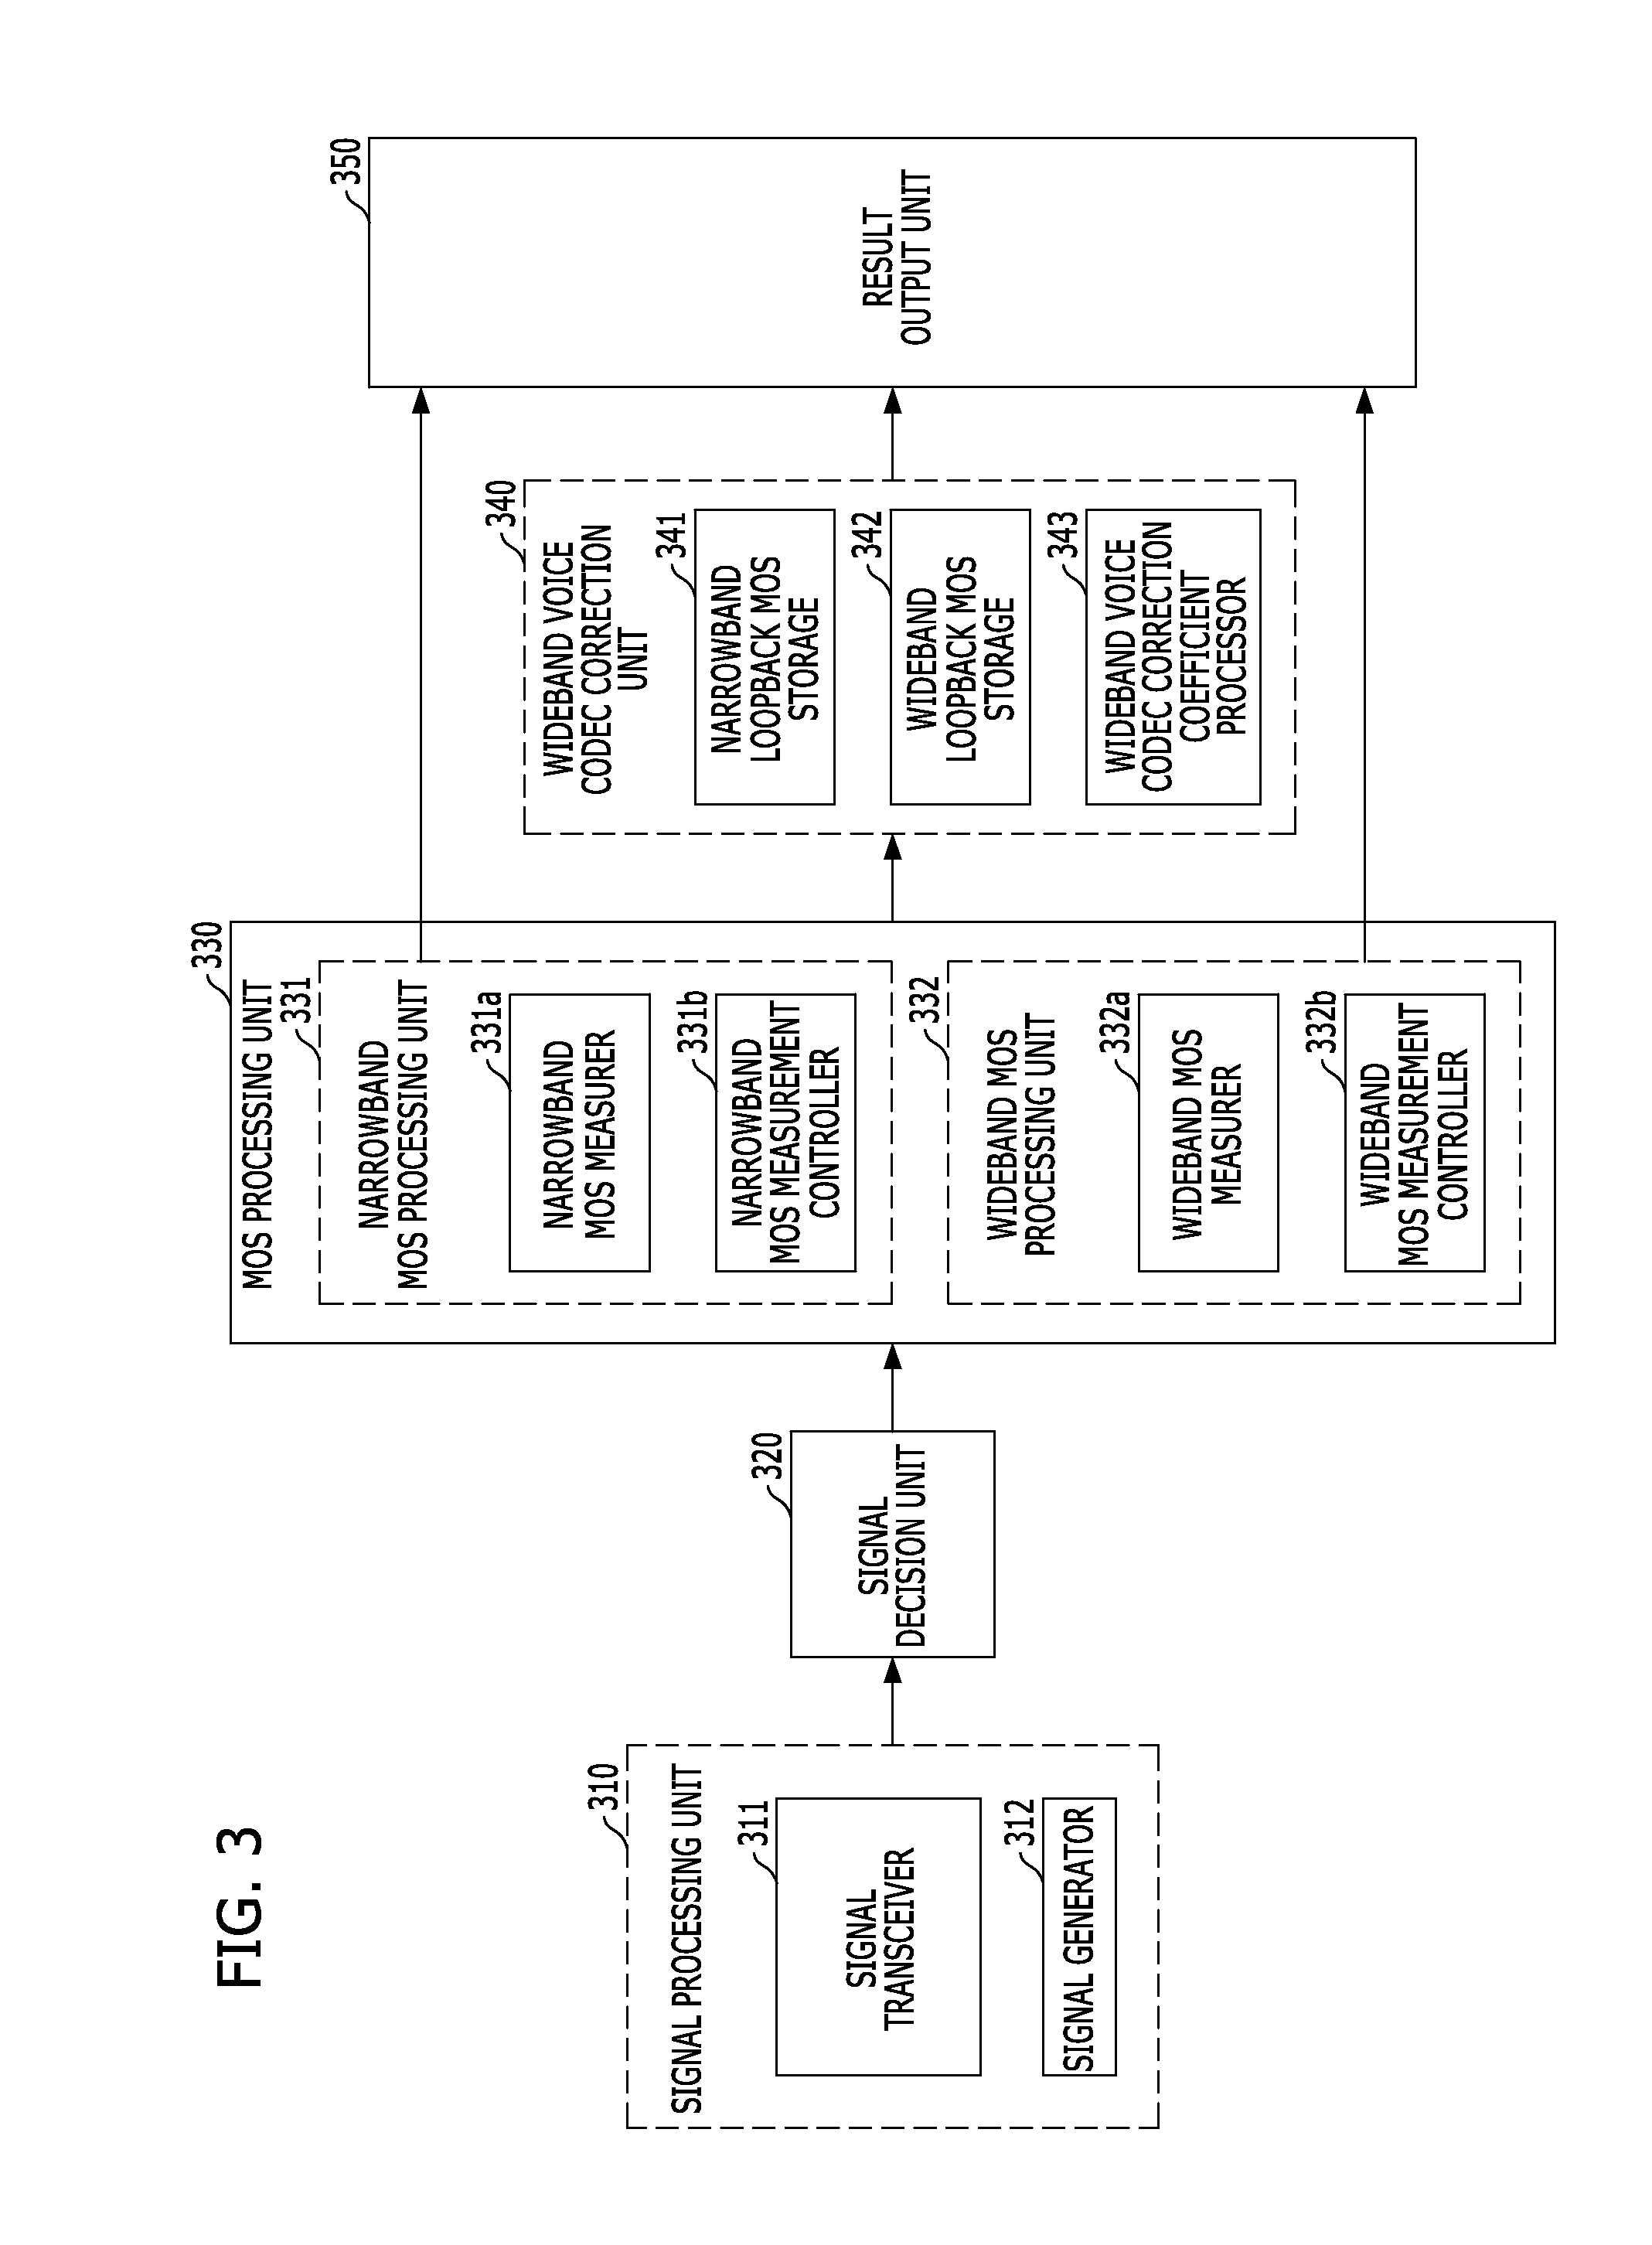 APPARATUS AND METHOD FOR MEASURING VOICE QUALITY OF VoIP TERMINAL USING WIDEBAND VOICE CODEC